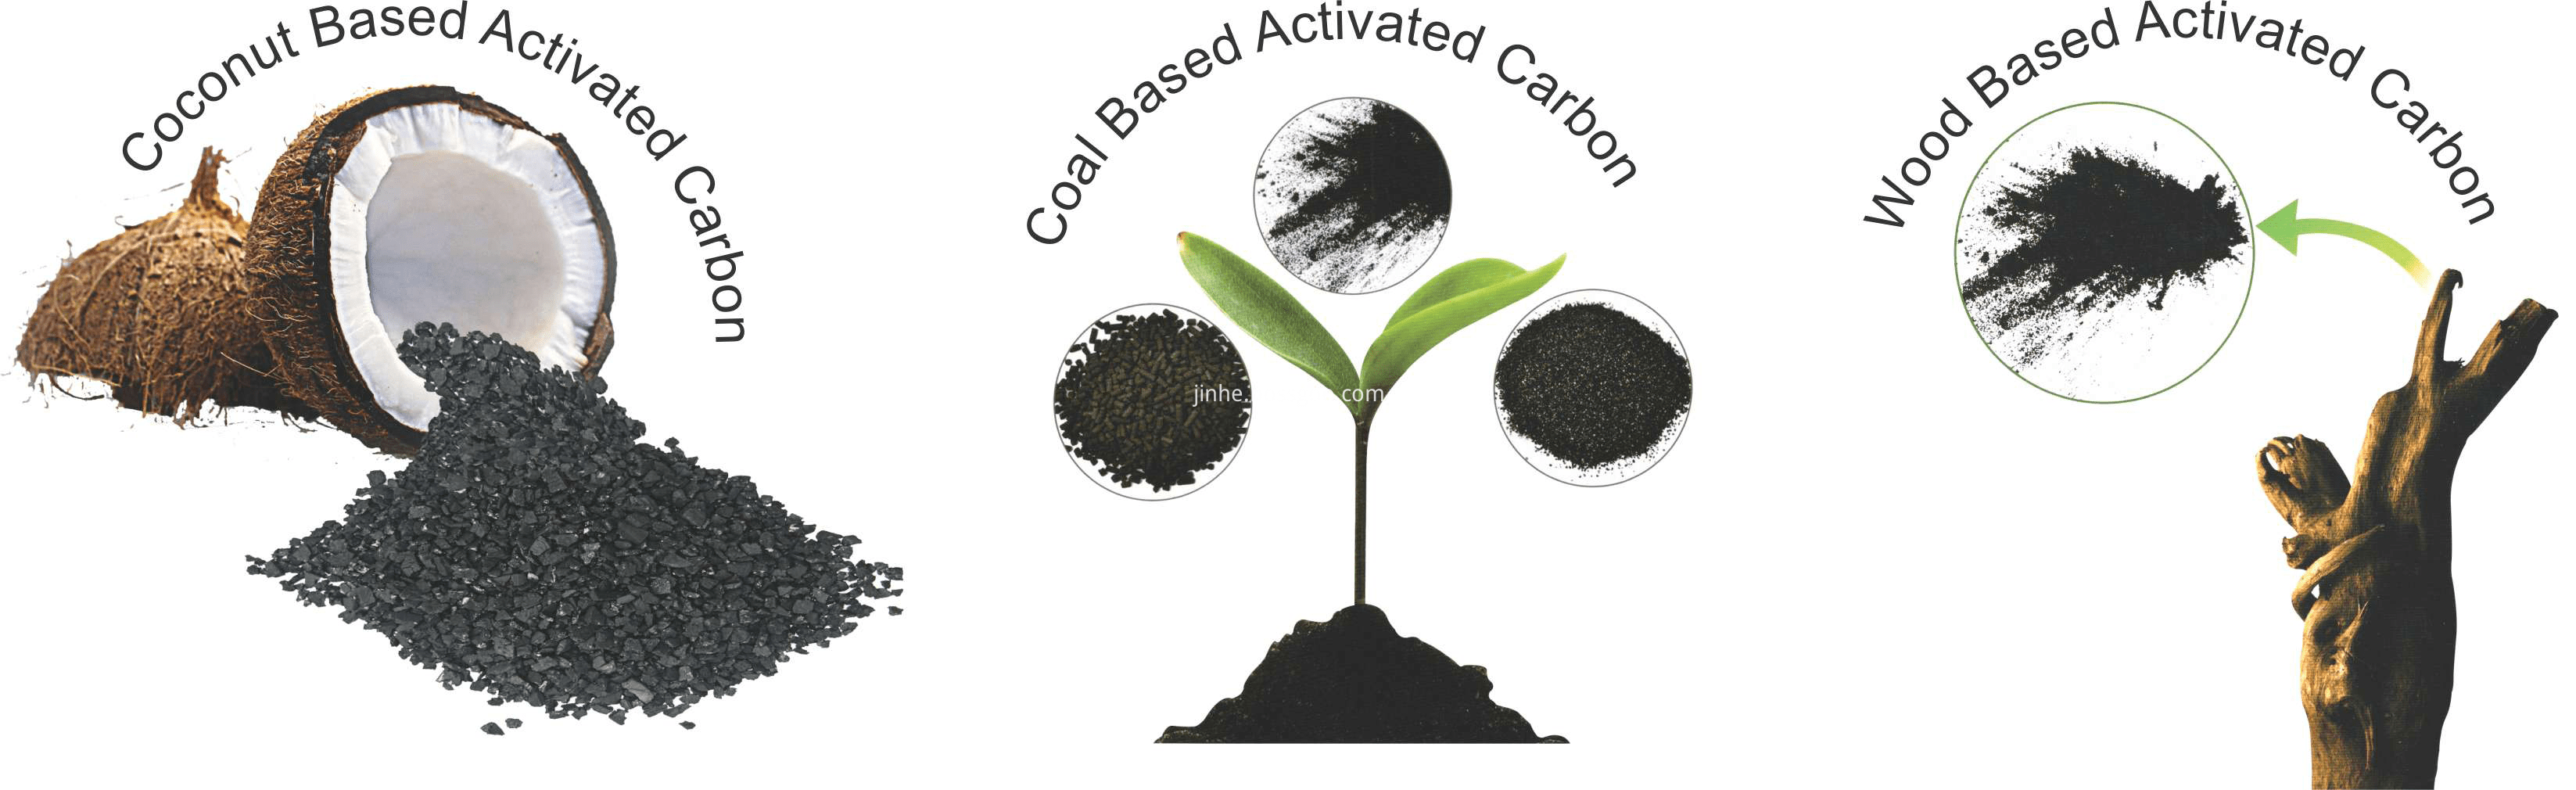 325Mesh Powder Activated Carbon For Wastewater treatment